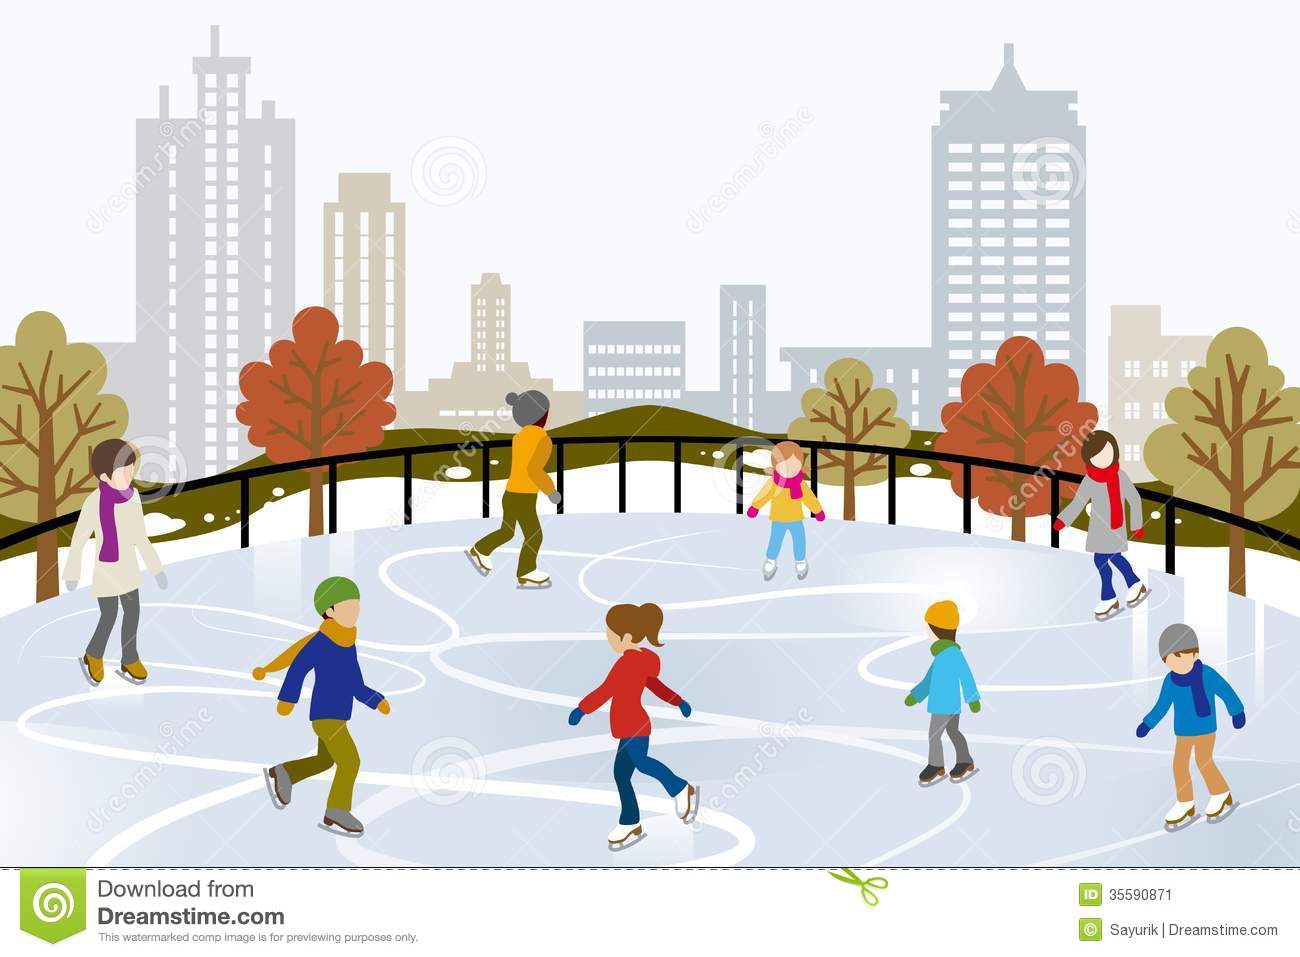 Ice rink clipart - Clipground